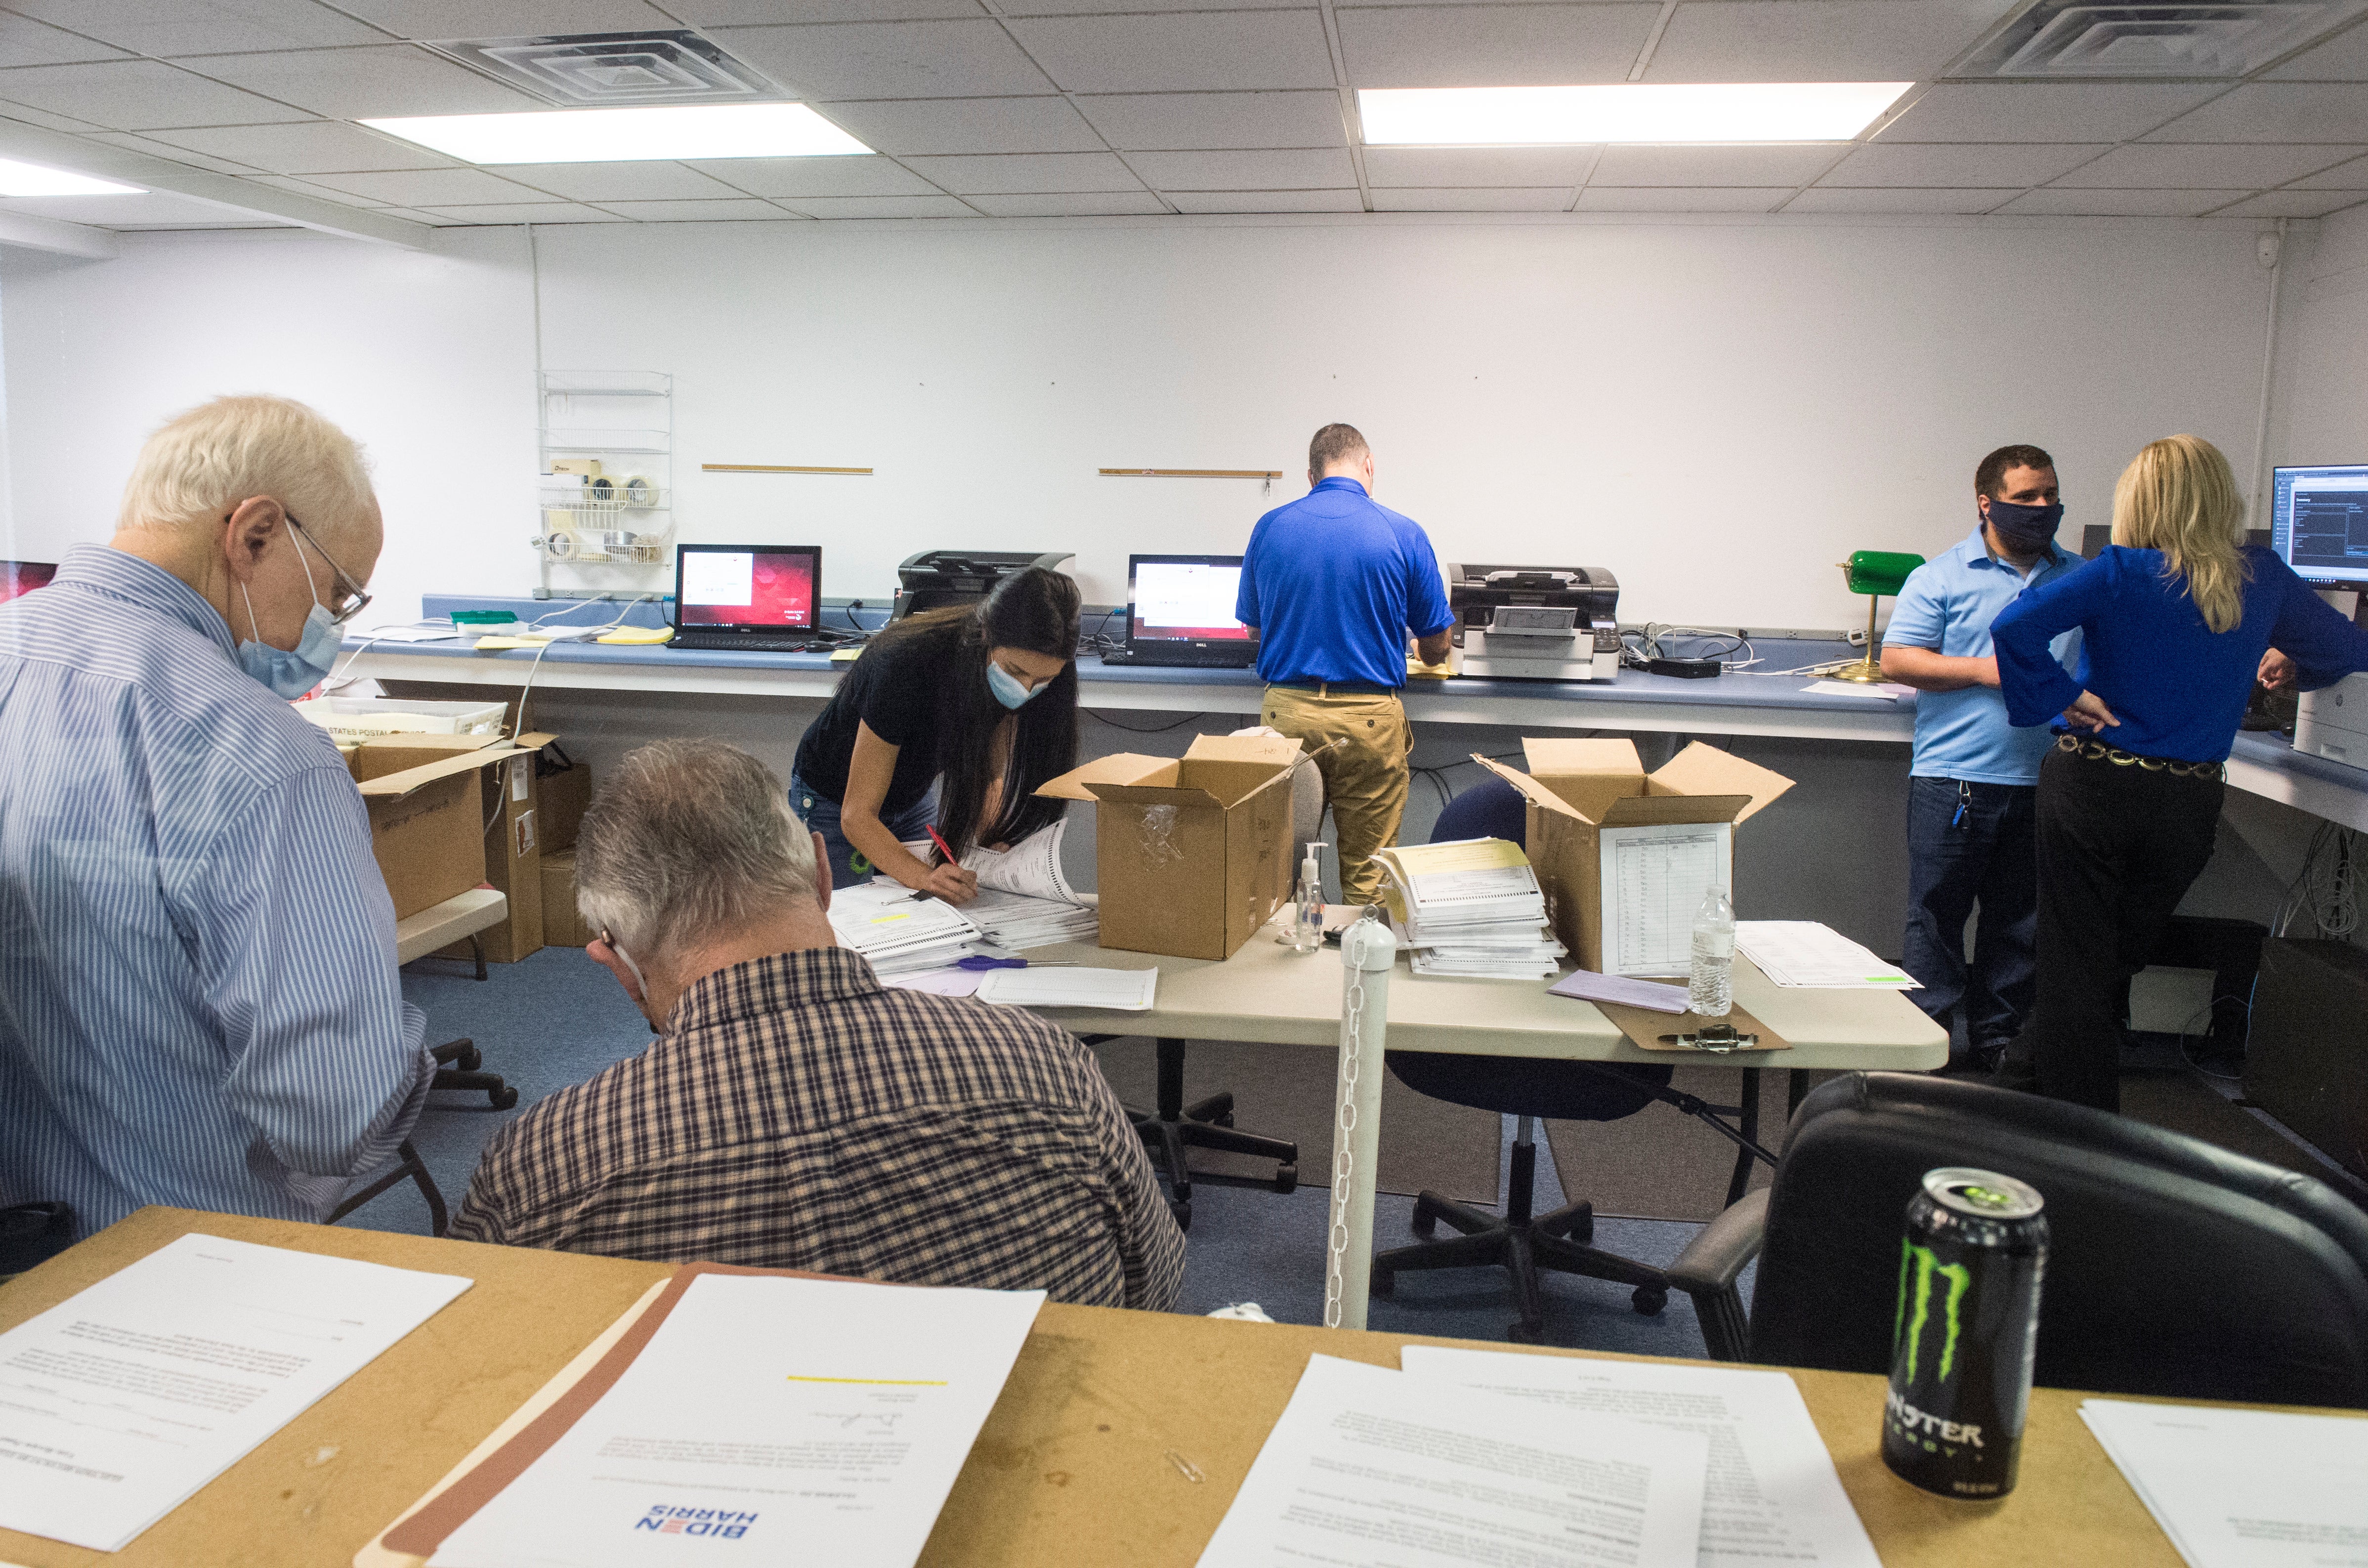 Republican observers watch election officials counting absentee ballots during the Georgia presidential election recount